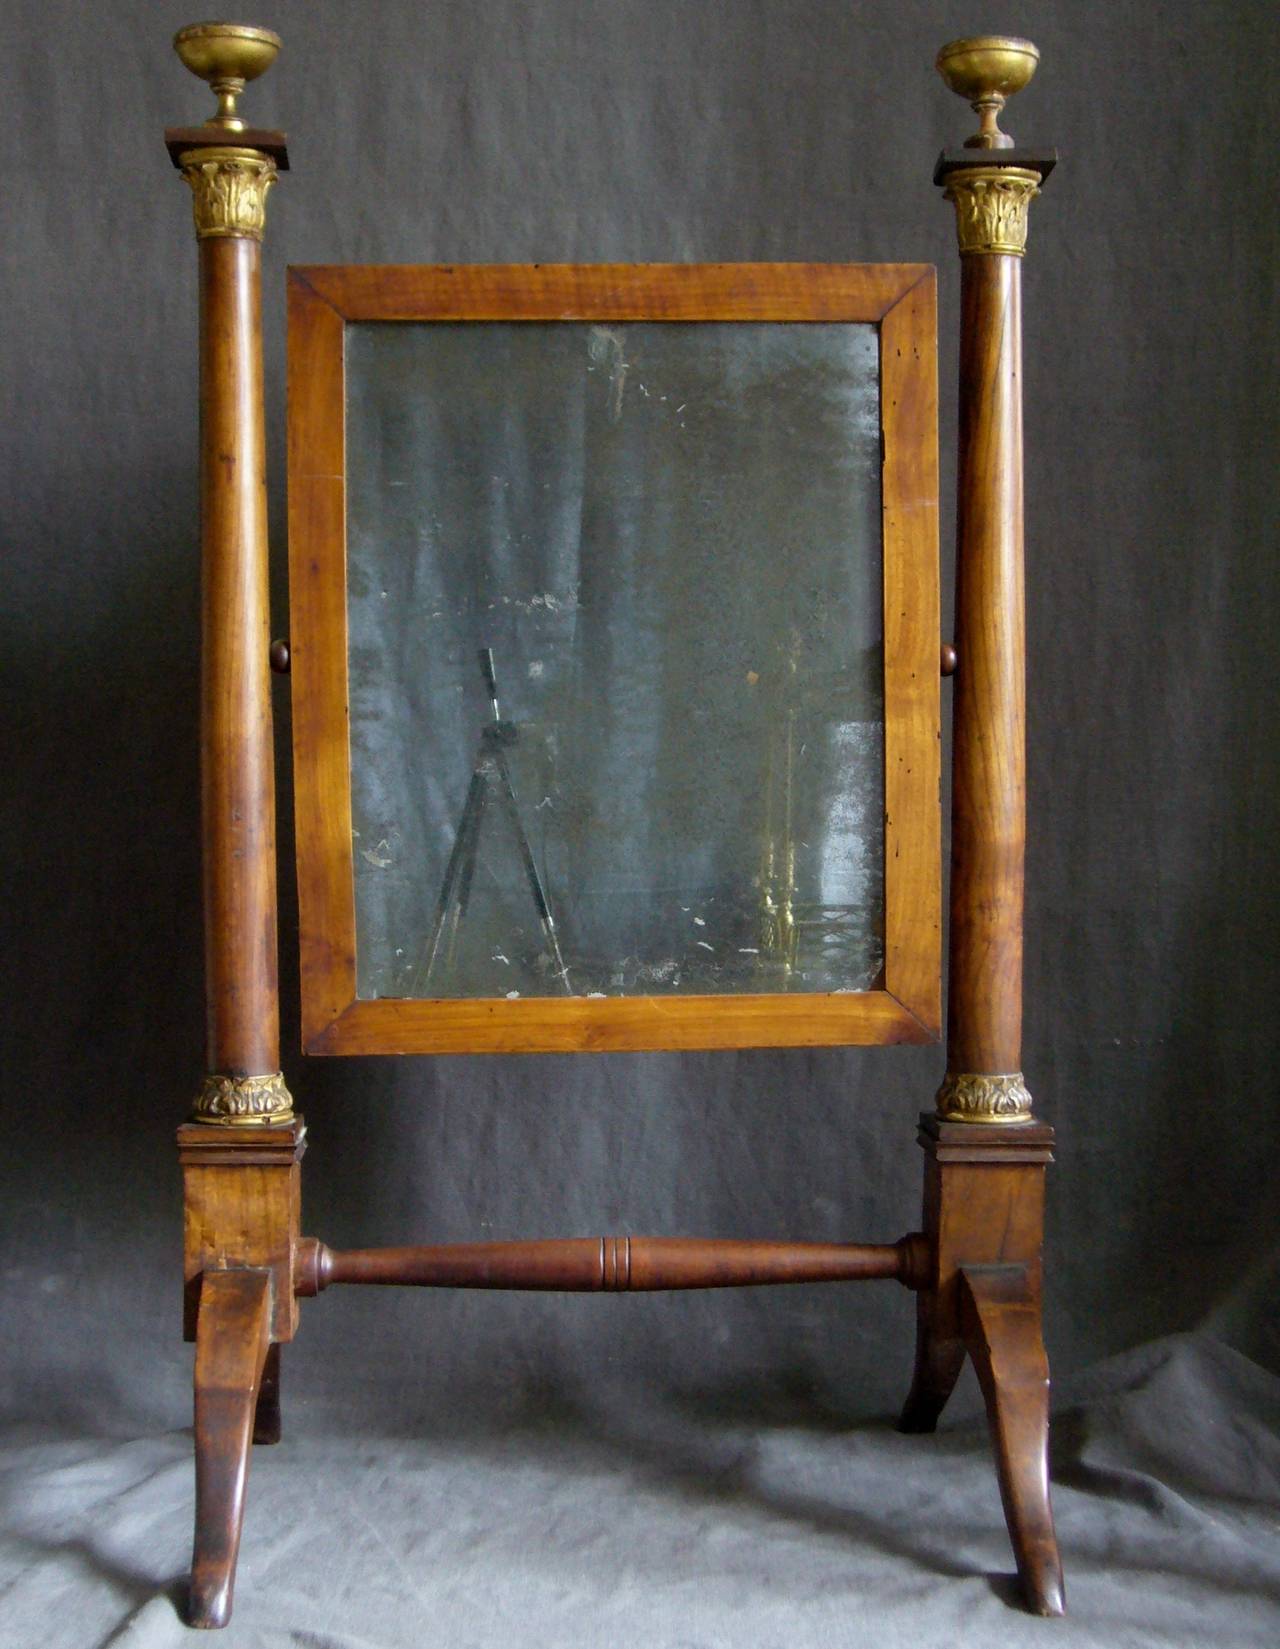 Antique Empire fruitwood dressing mirror with neoclassical giltwood details and original glass. Newly restored, Italy, circa 1800.
Dimension: 21.5